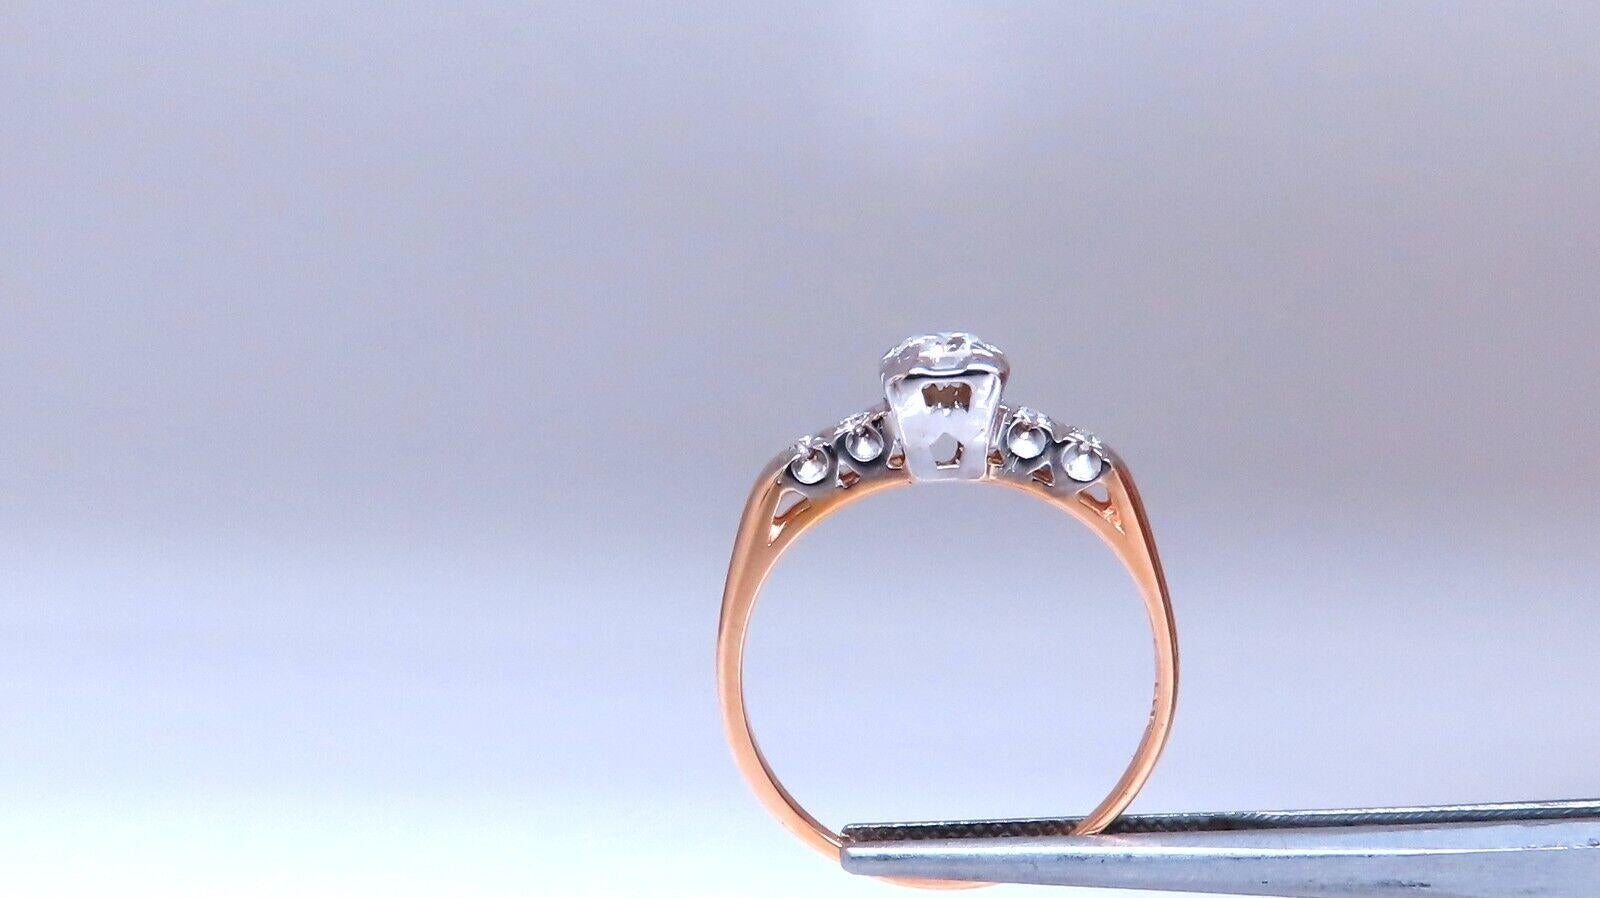 .40ct Natural round Cut Diamond Ring

vs-2 clarity G color.

.10ct side diamonds

Si-1 clarity I-color

14kt yellow gold

2.5 Grams

Depth: 6mm

Current ring size: 9.5

May professionally resize, please inquire.